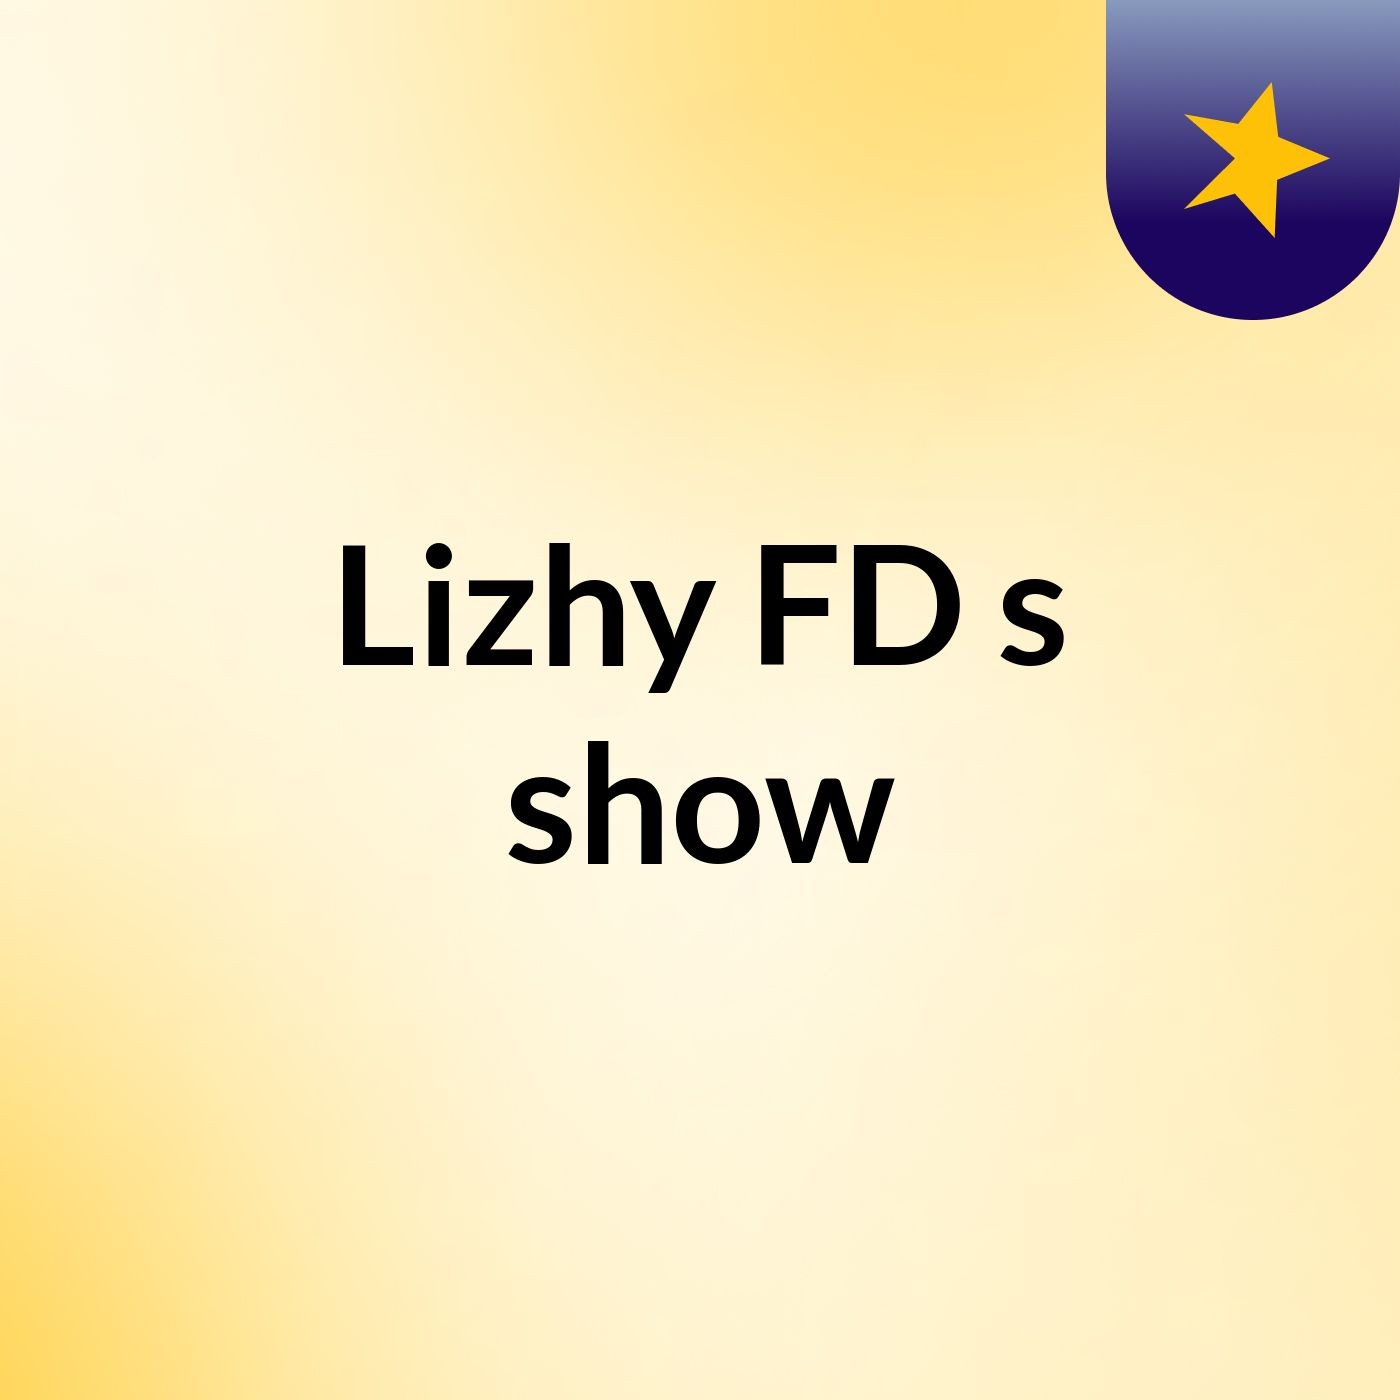 Lizhy FD's show